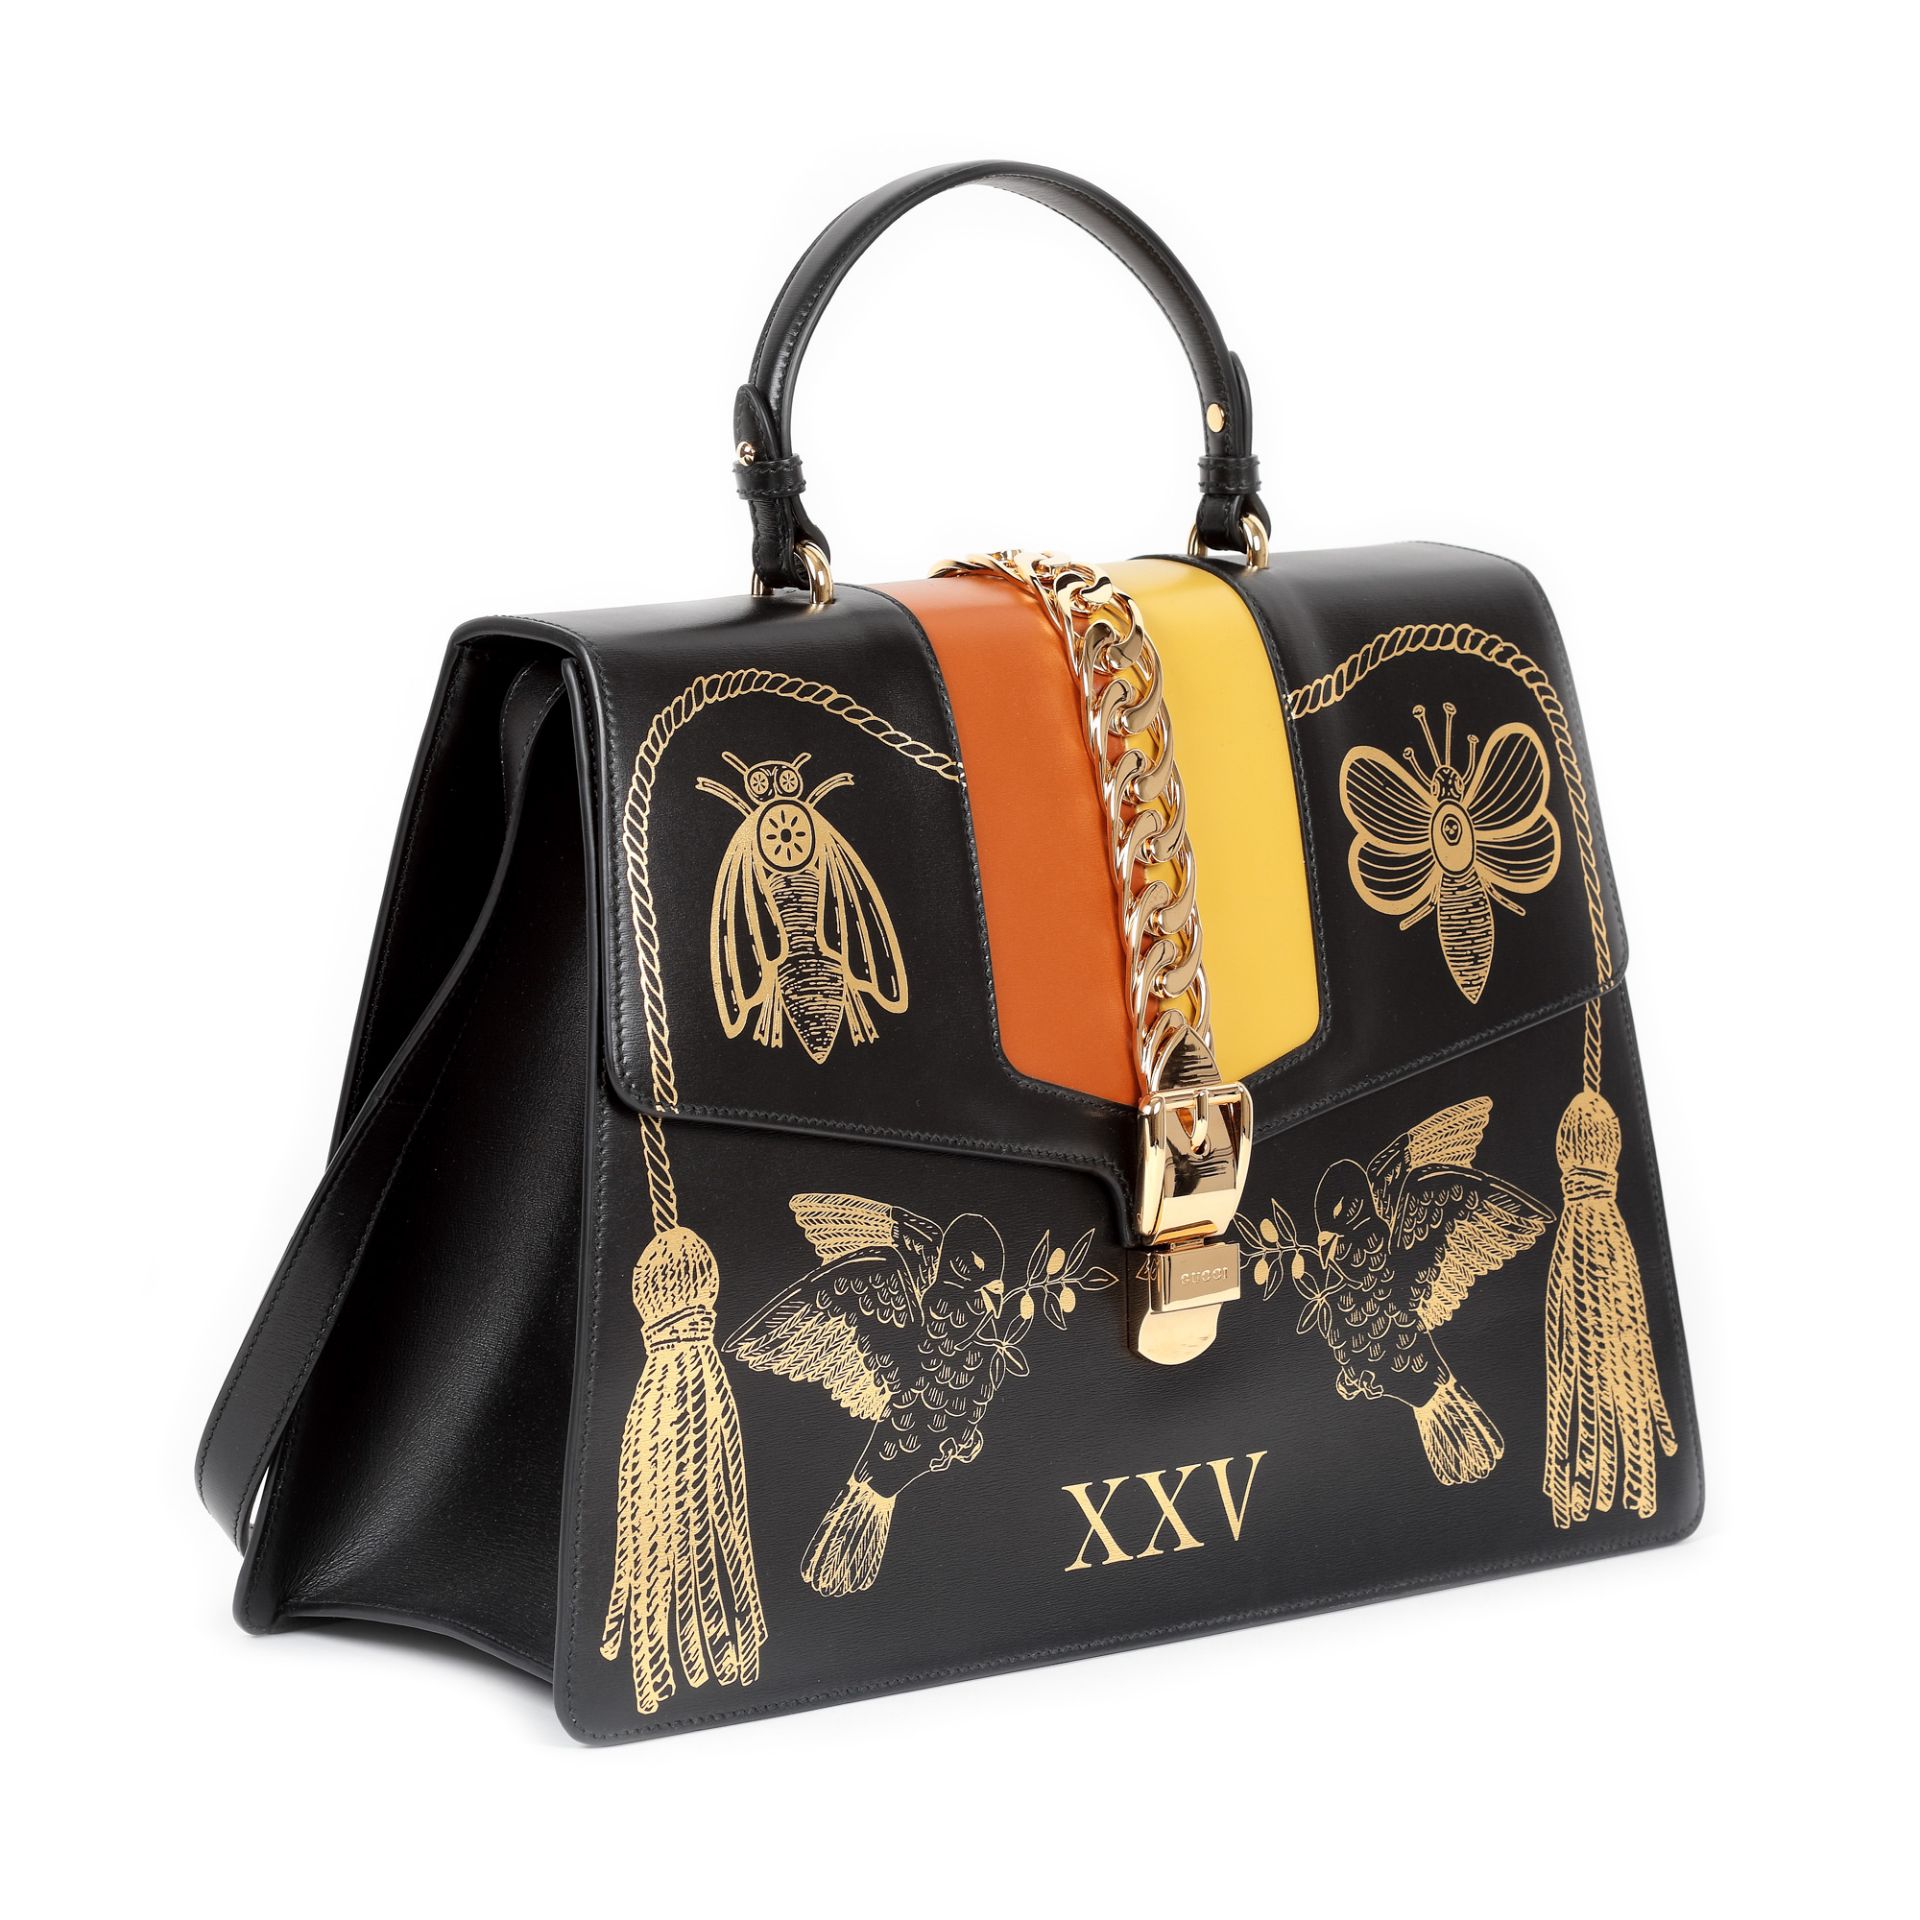 "Sylvie" - Gucci bag, leather, black, with birds and insects print - Image 2 of 5